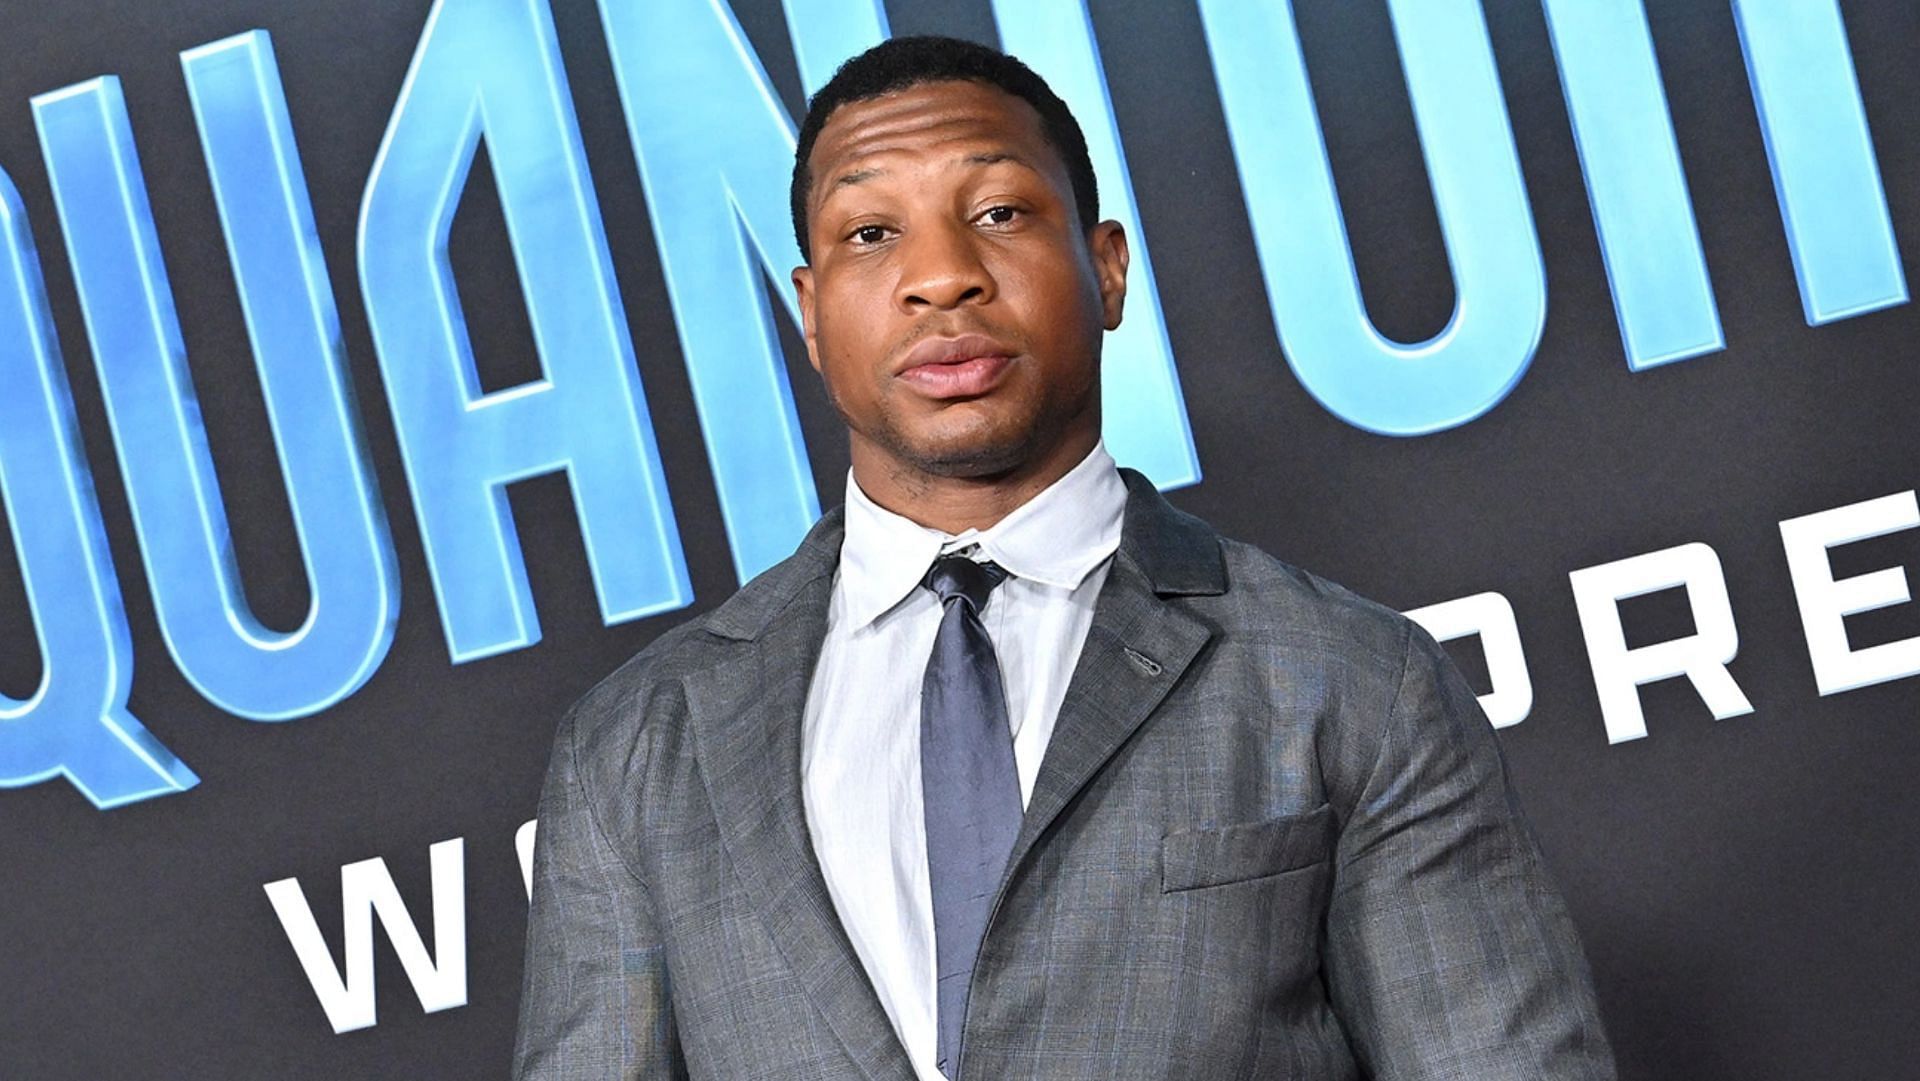 Jonathan Majors latest cover shoot slammed for being too effeminate   Queerty